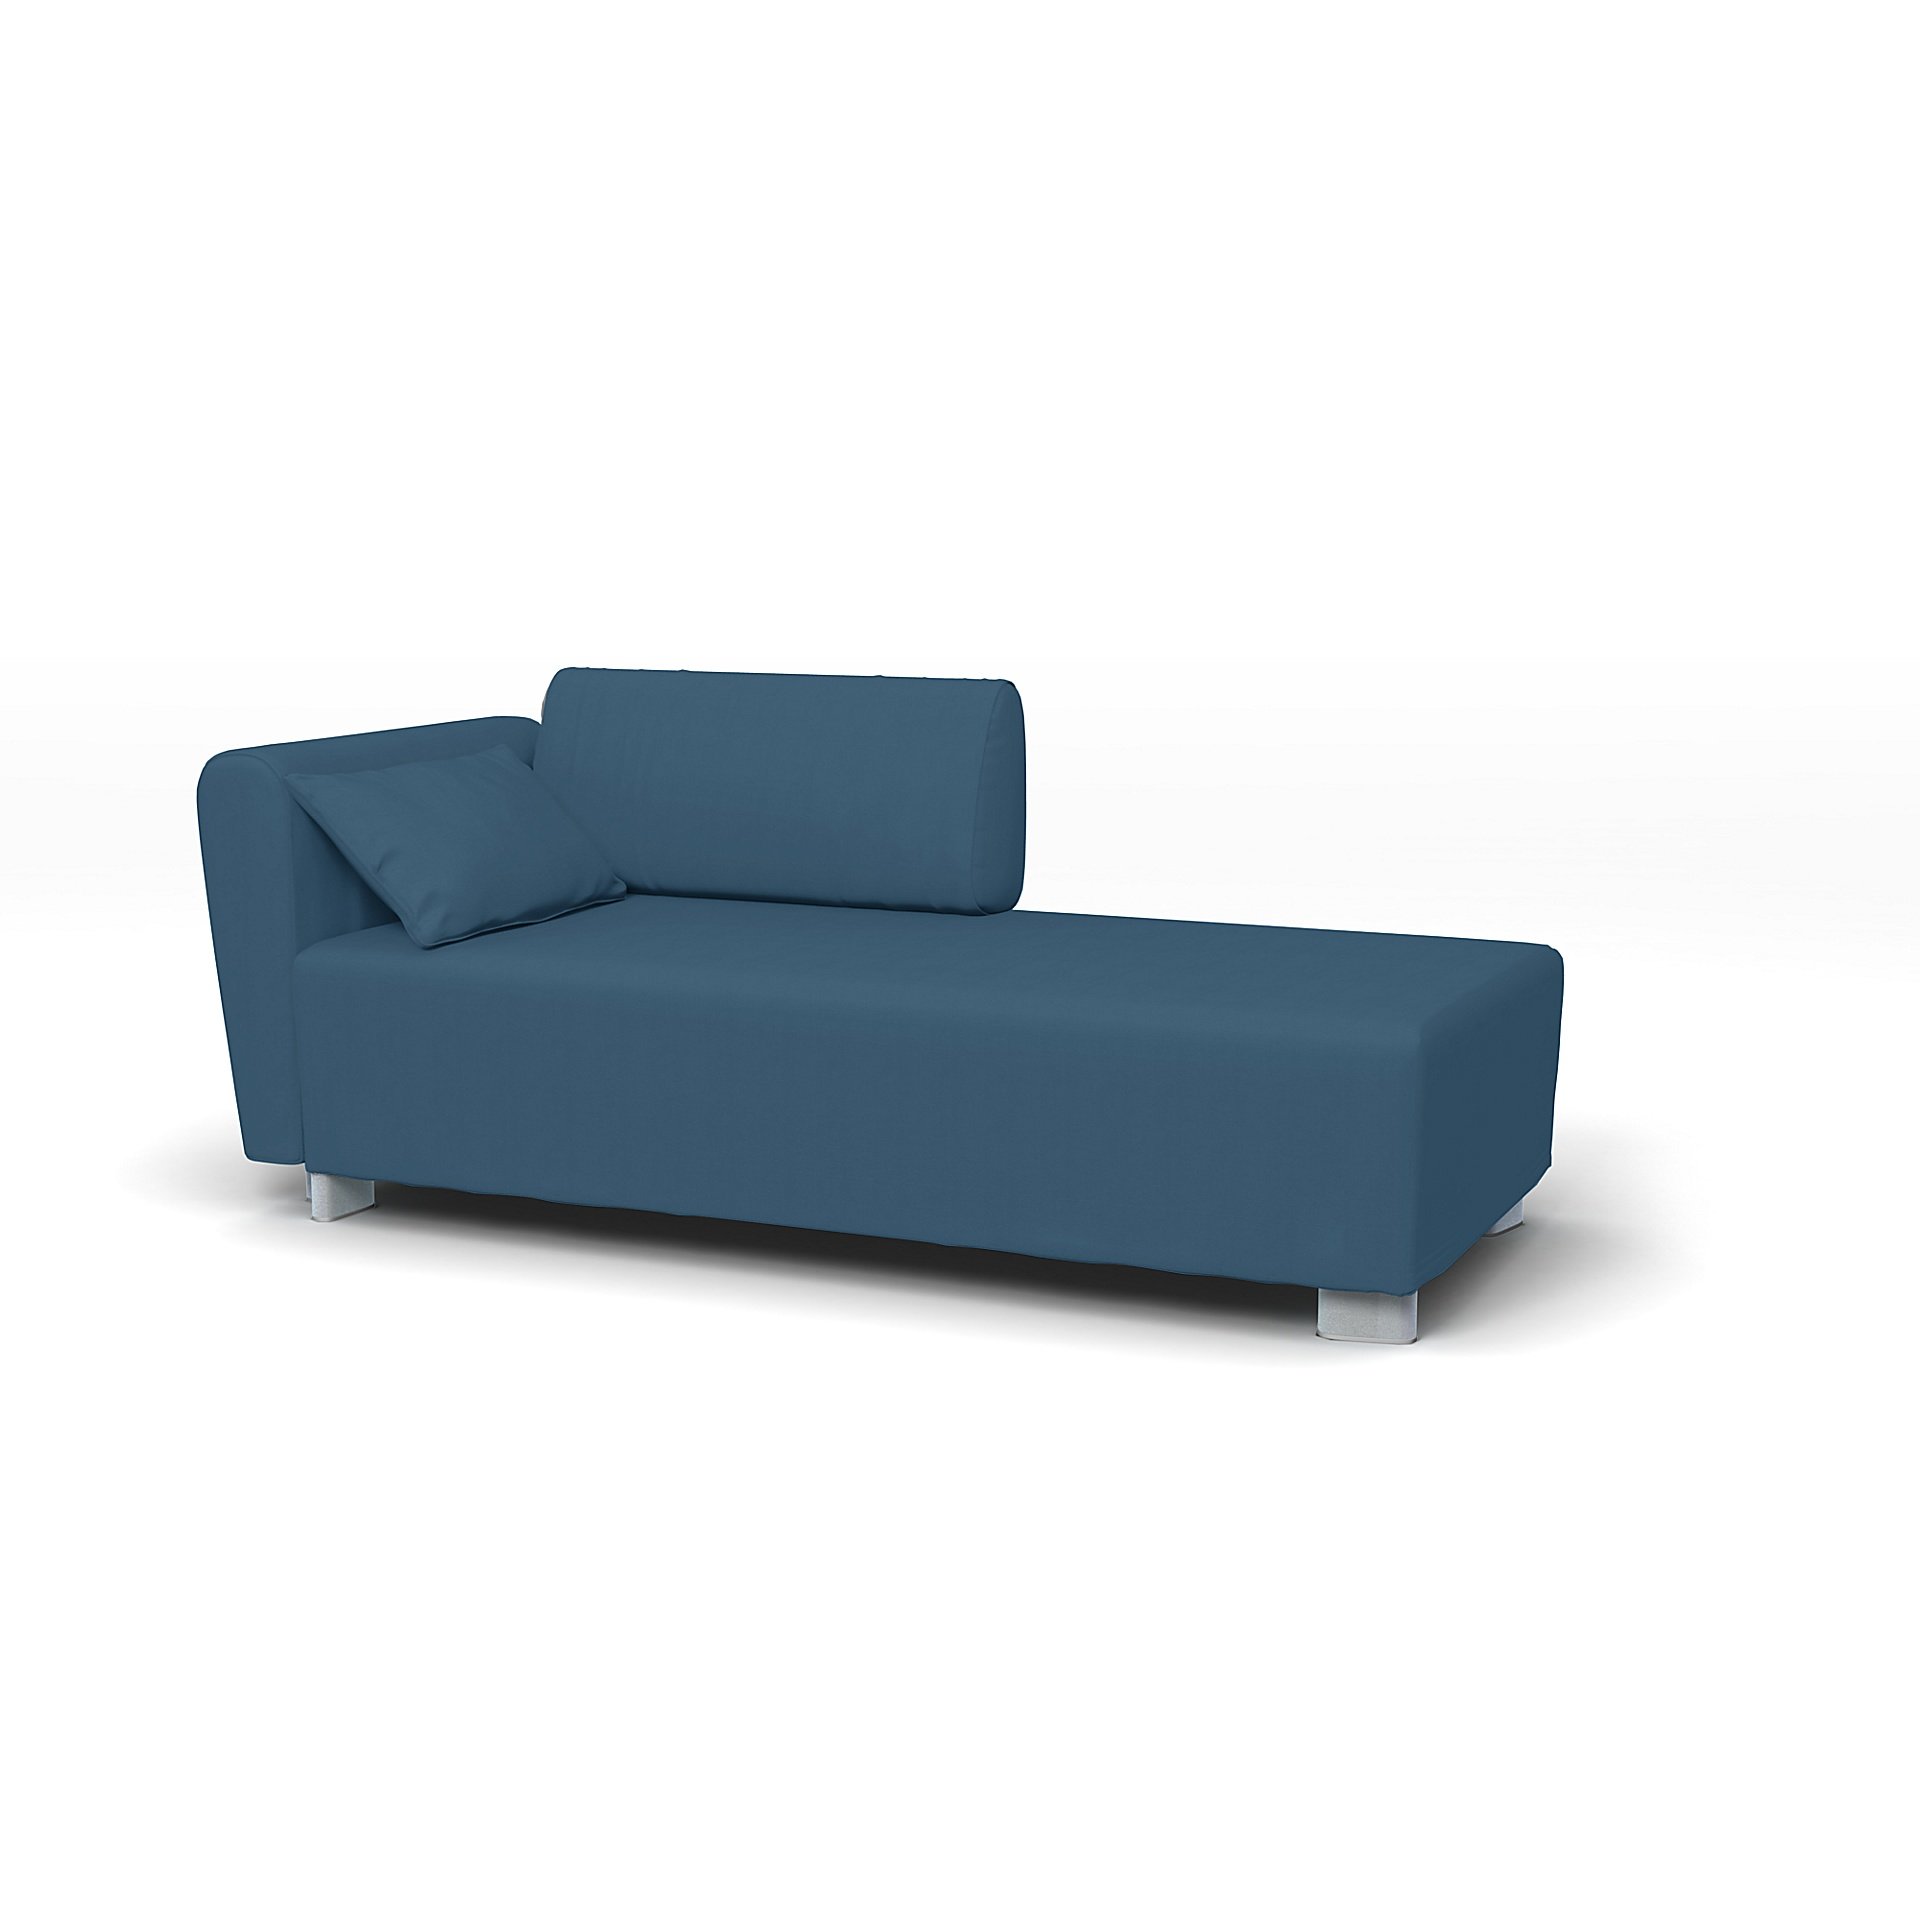 IKEA - Mysinge Chaise Longue with Armrest Cover, Real Teal, Cotton - Bemz